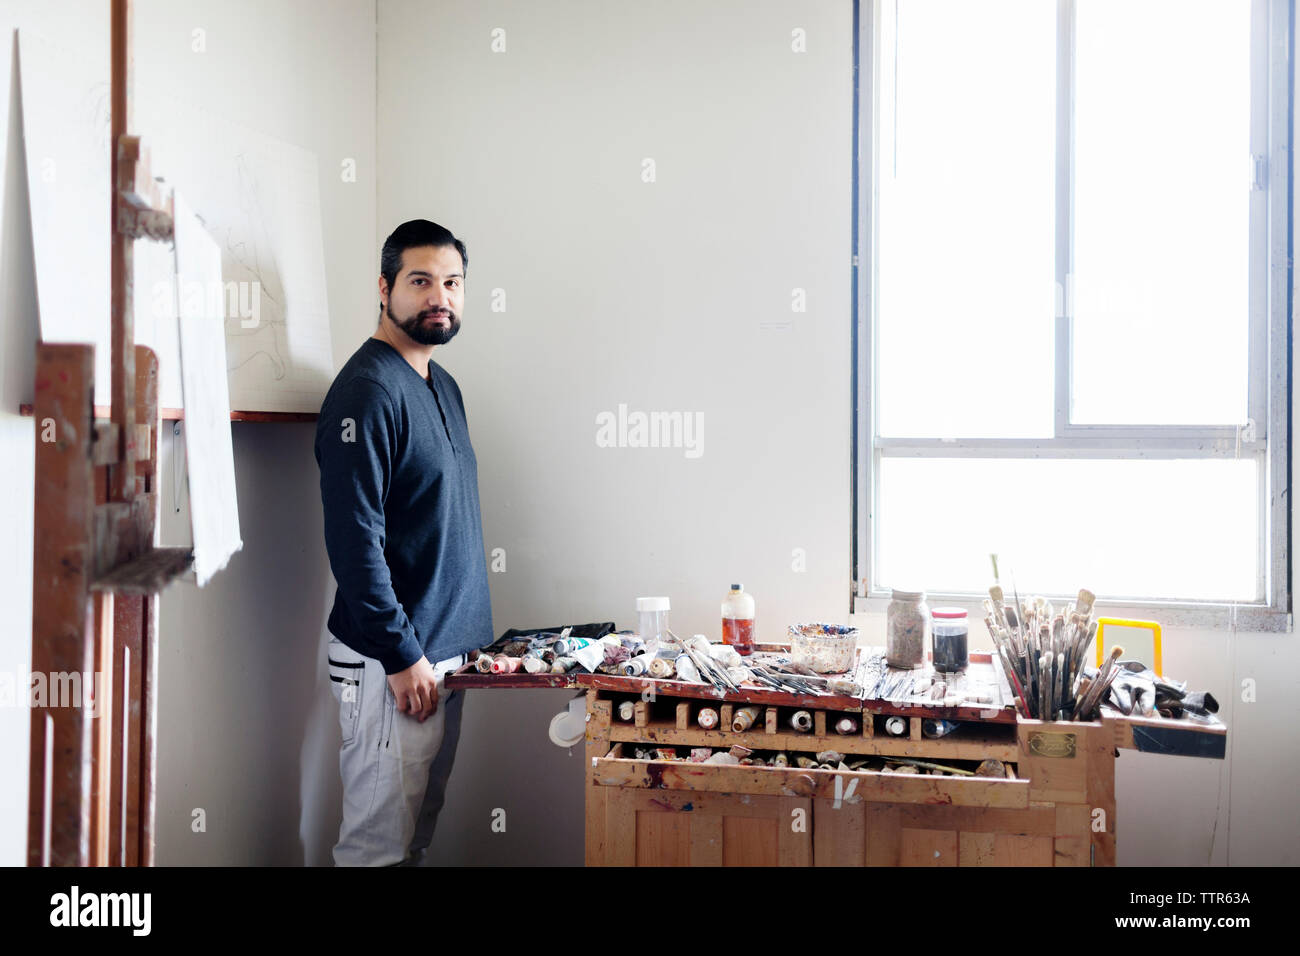 Portrait of painter standing by painting tools in art studio Stock Photo